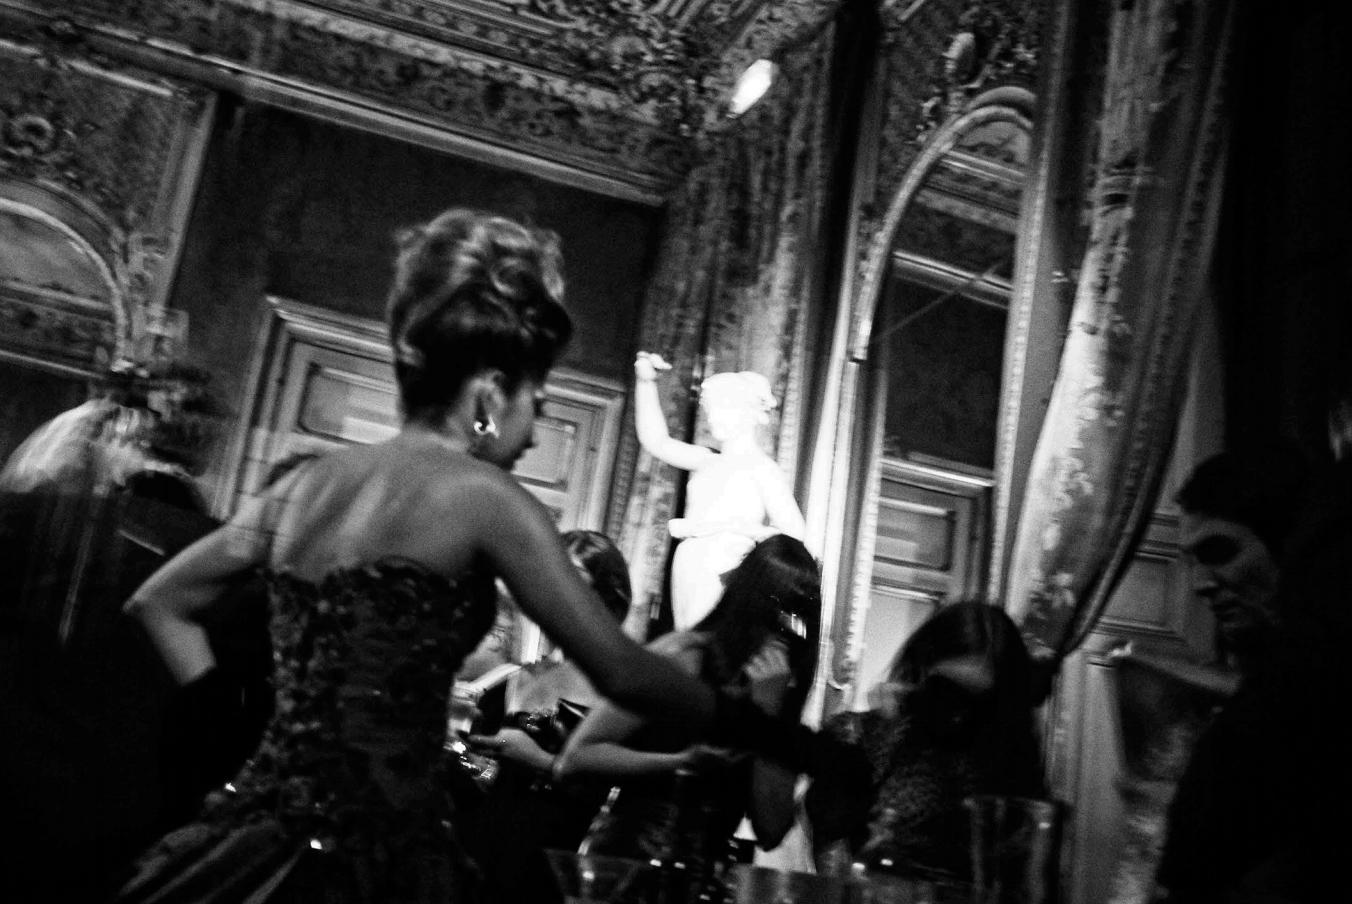 Untitled 19 Paris, From the series La Notte, Black and White Photograph